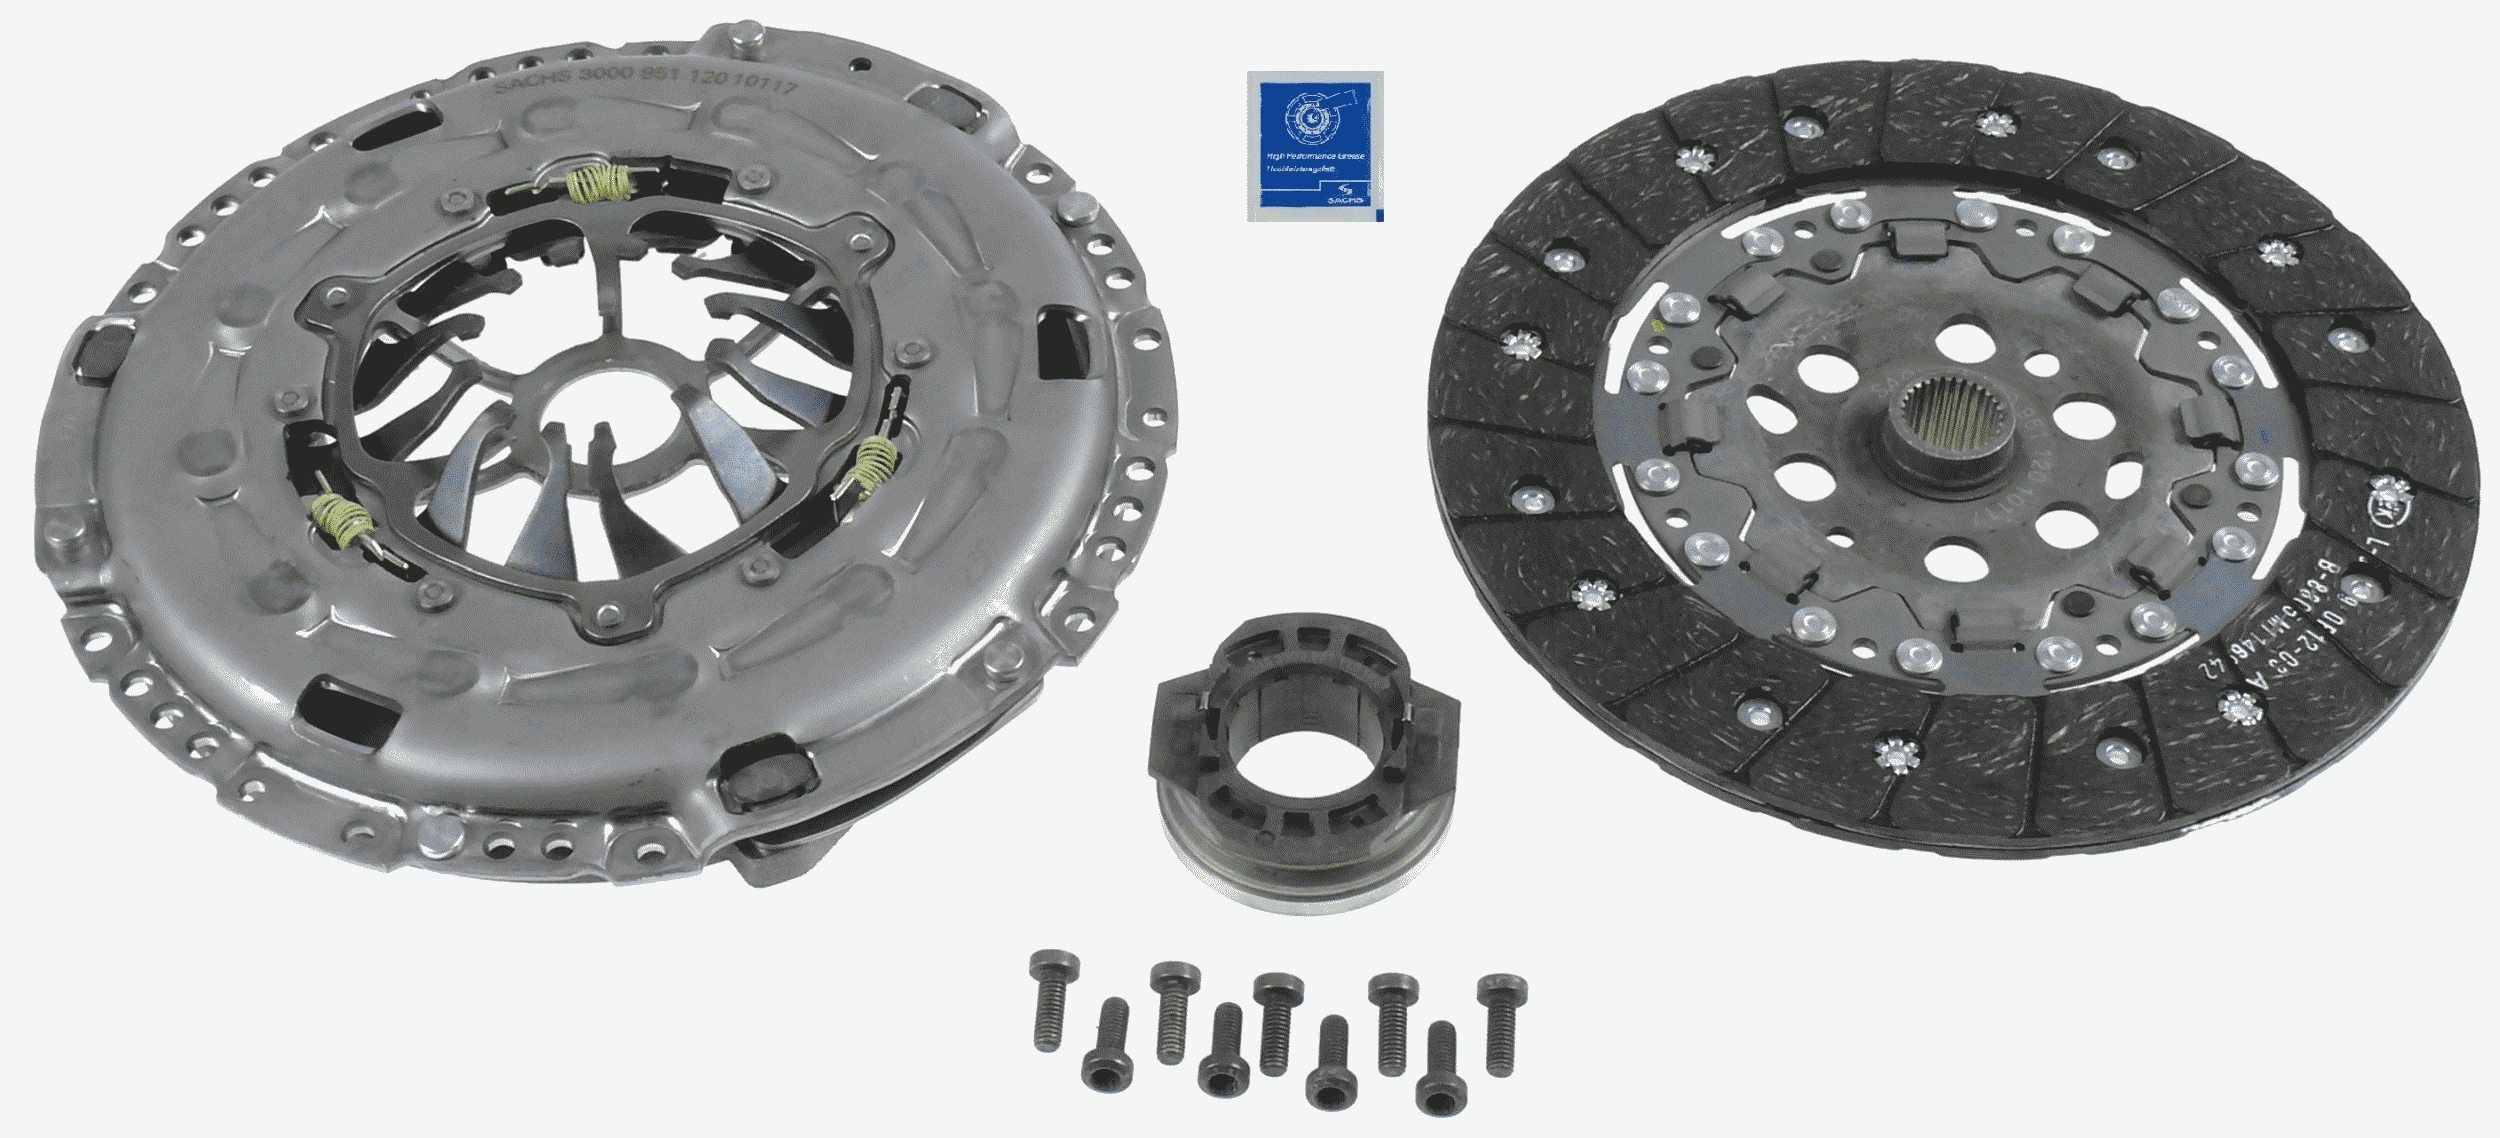 SACHS XTend 3000 951 120 Clutch kit with pressure plate screws, with clutch release bearing, 230mm